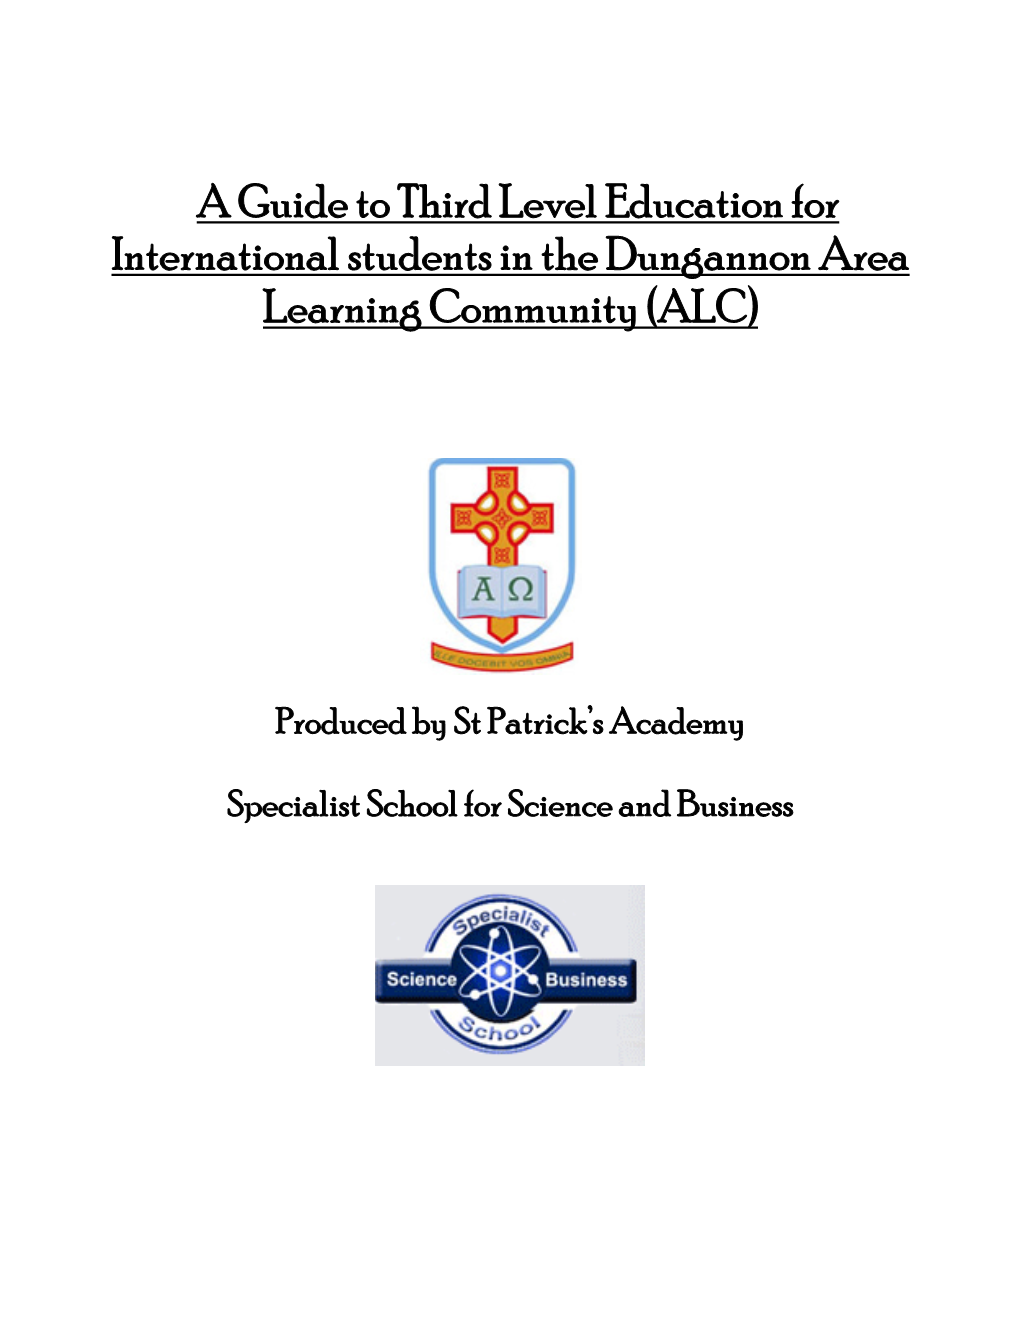 A Guide to Third Level Education for International Students in the Dungannon Area Learning Community (ALC)